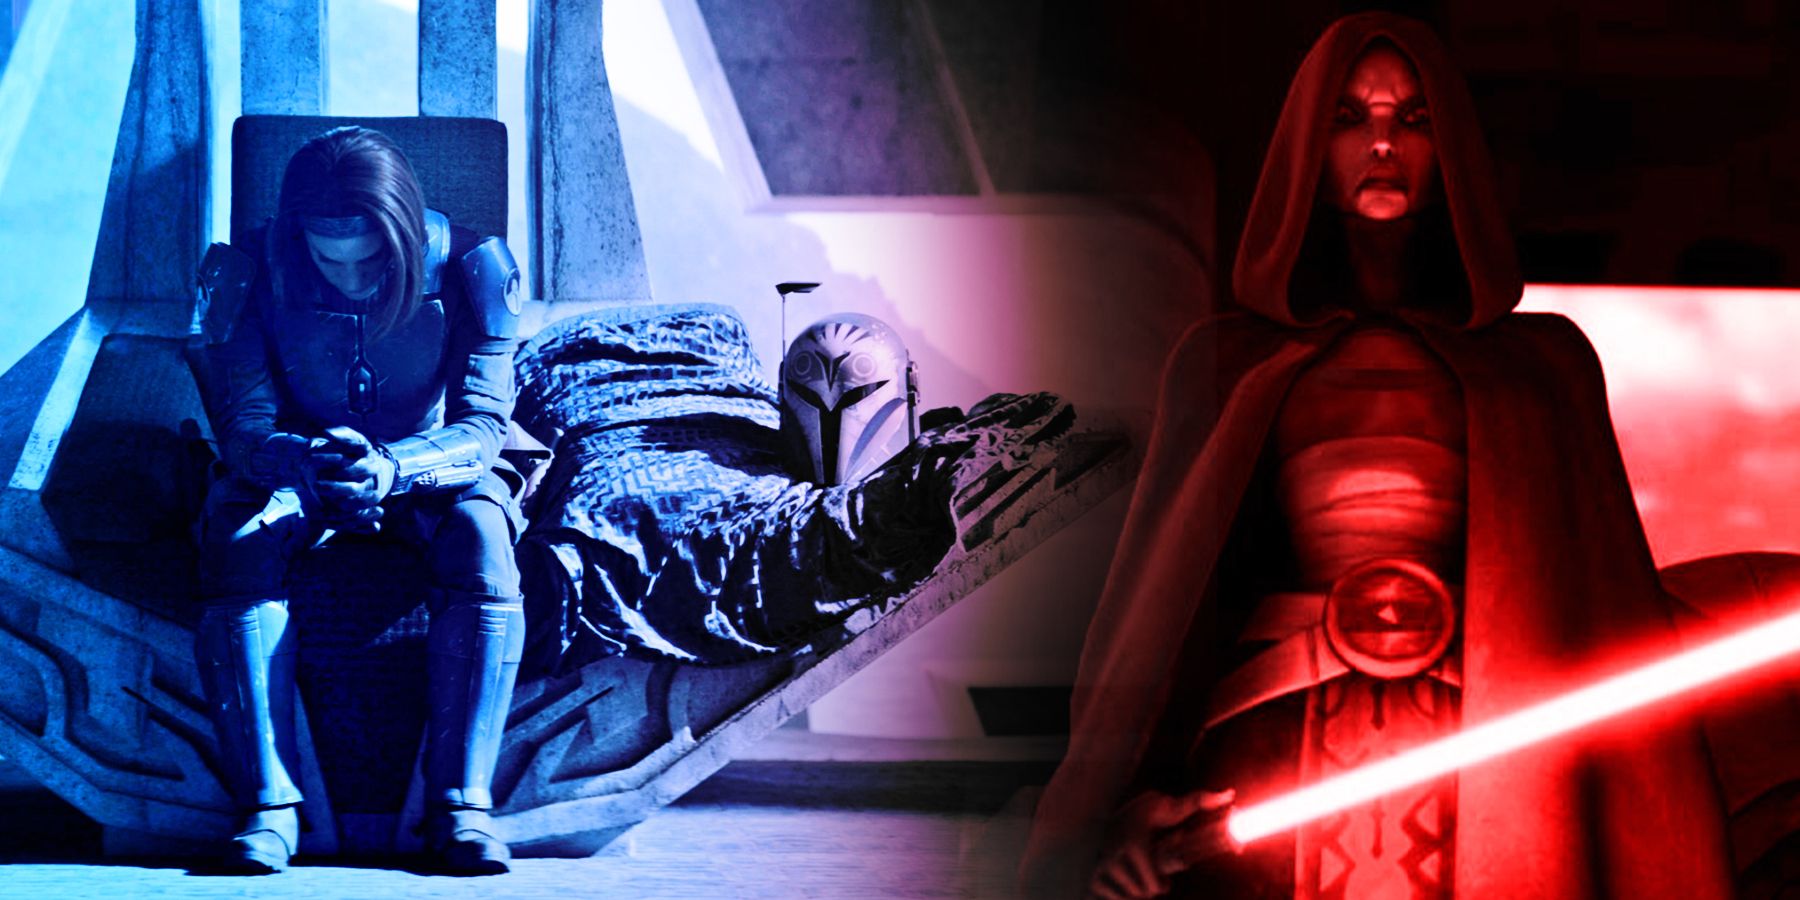 Star Wars 14 Strongest Female Characters Of The Franchise, Ranked